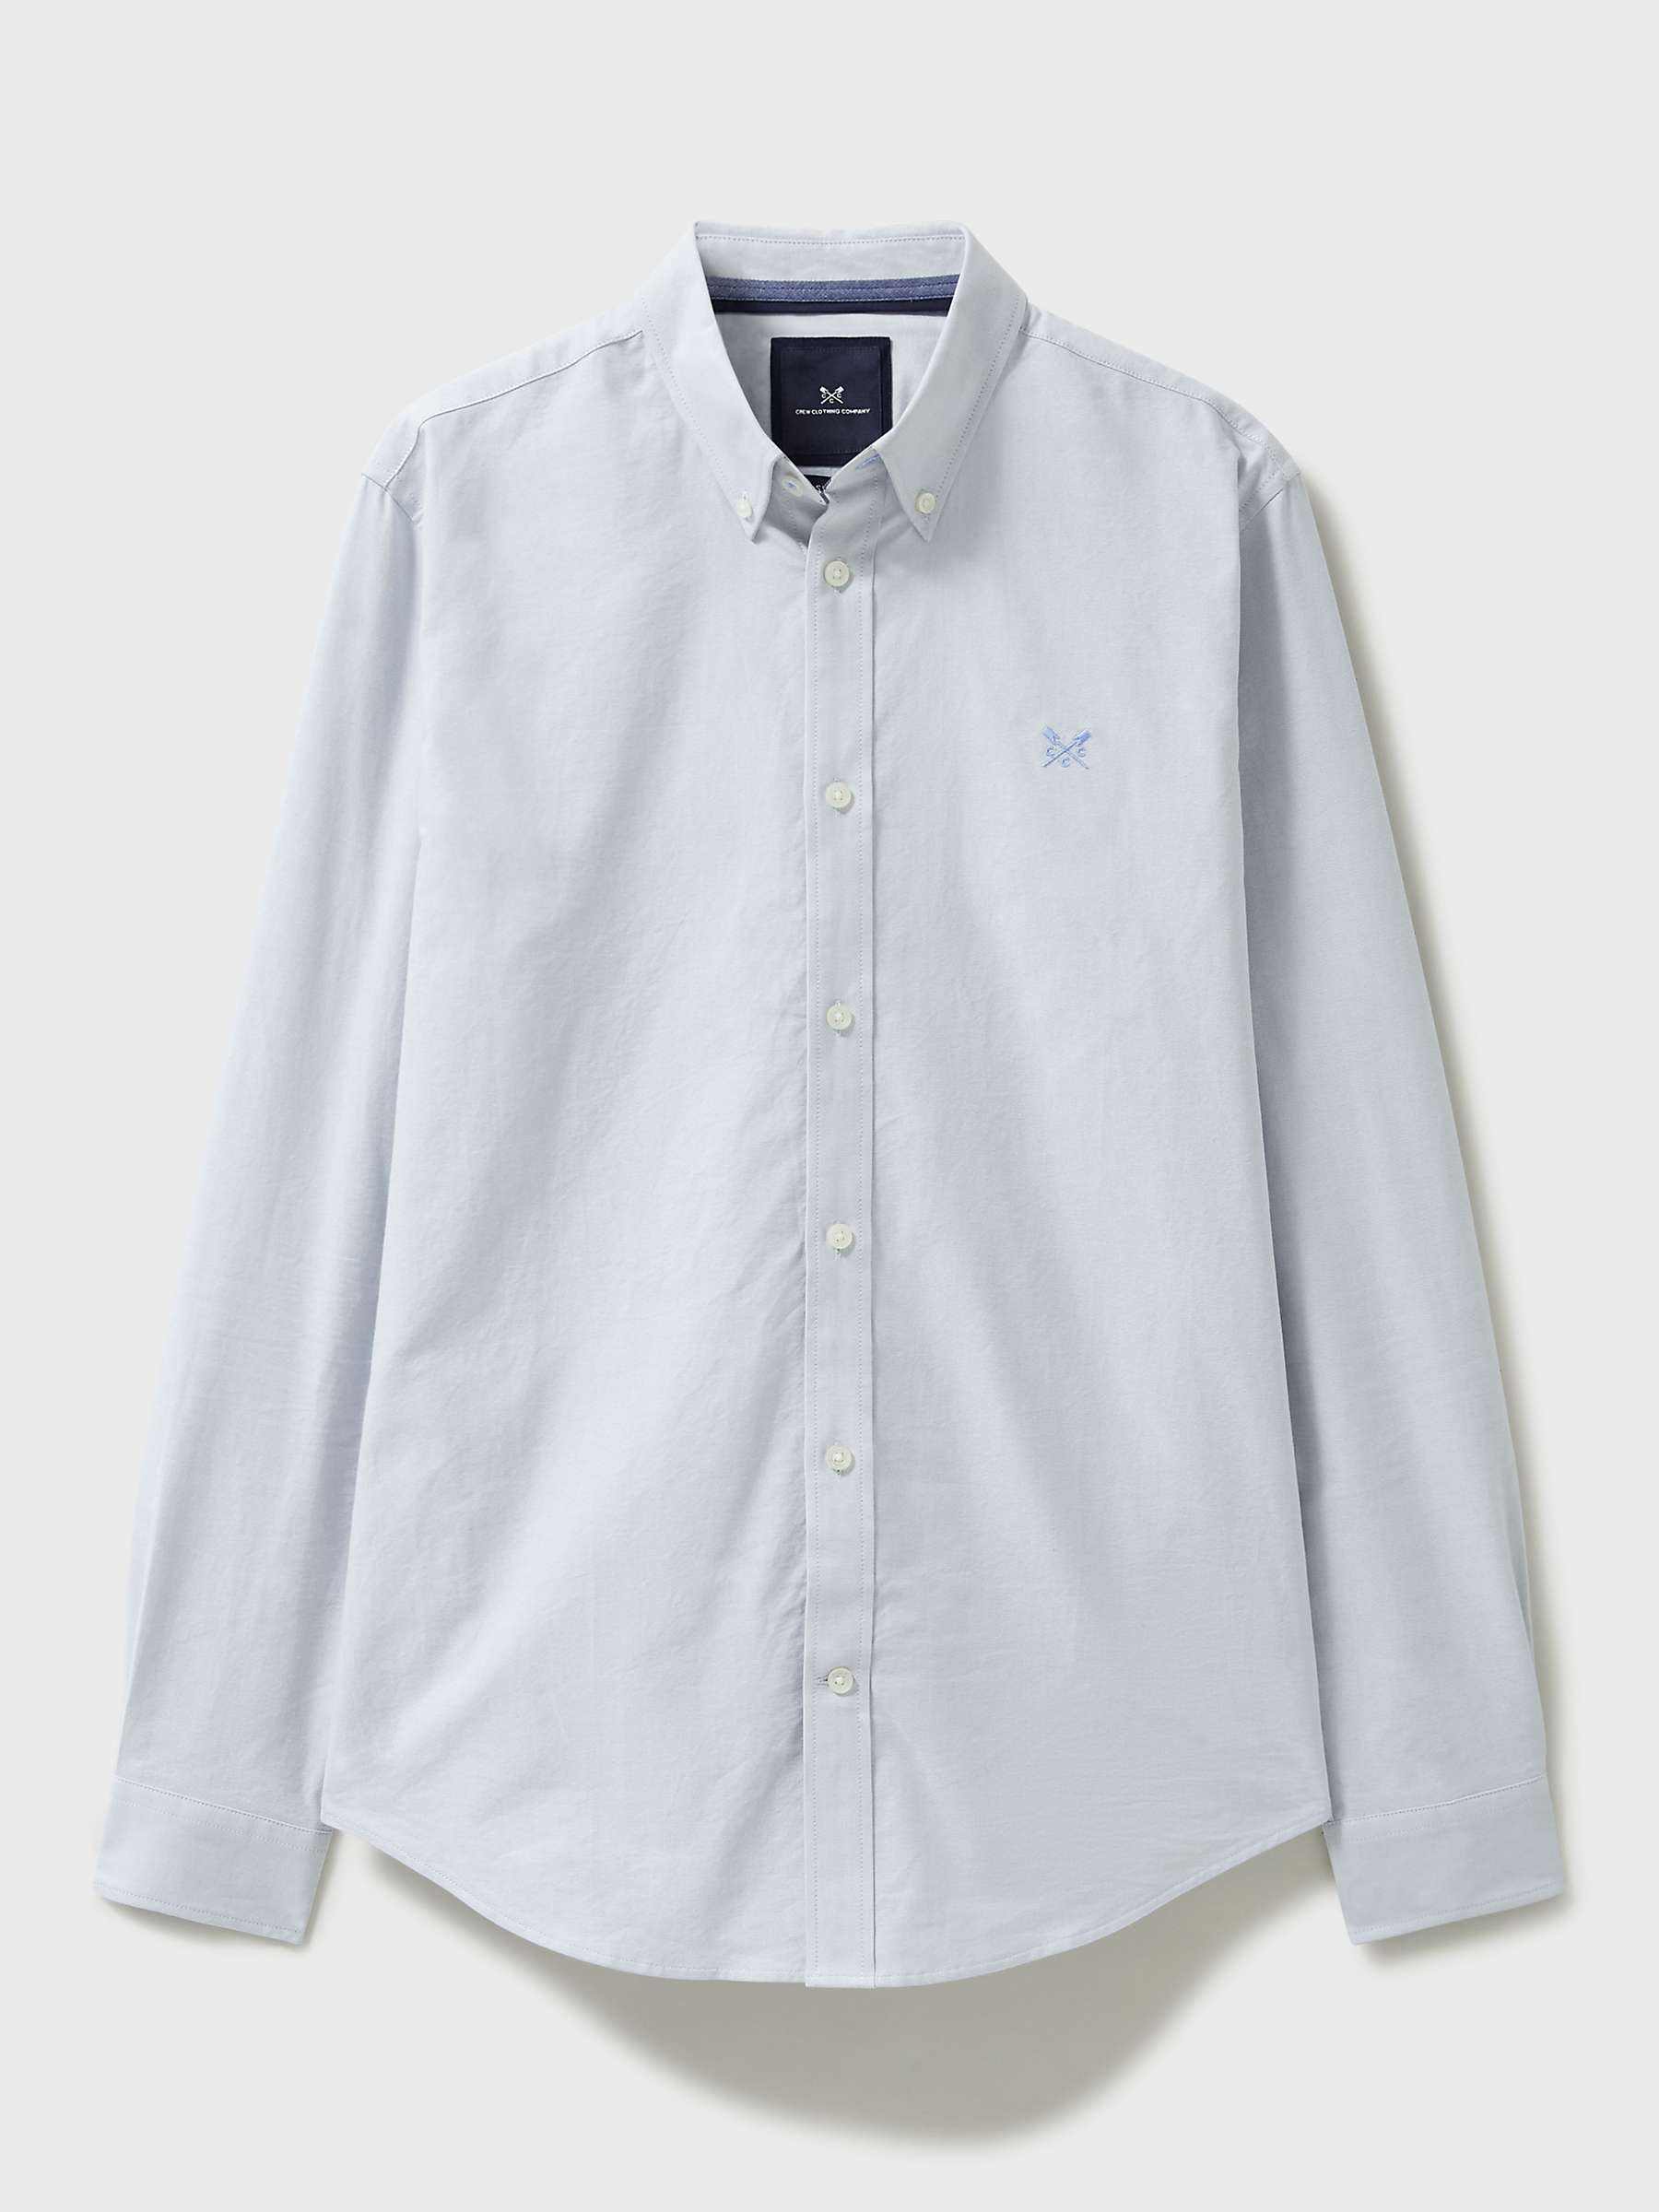 Buy Crew Clothing Oxford Cotton Shirt Online at johnlewis.com